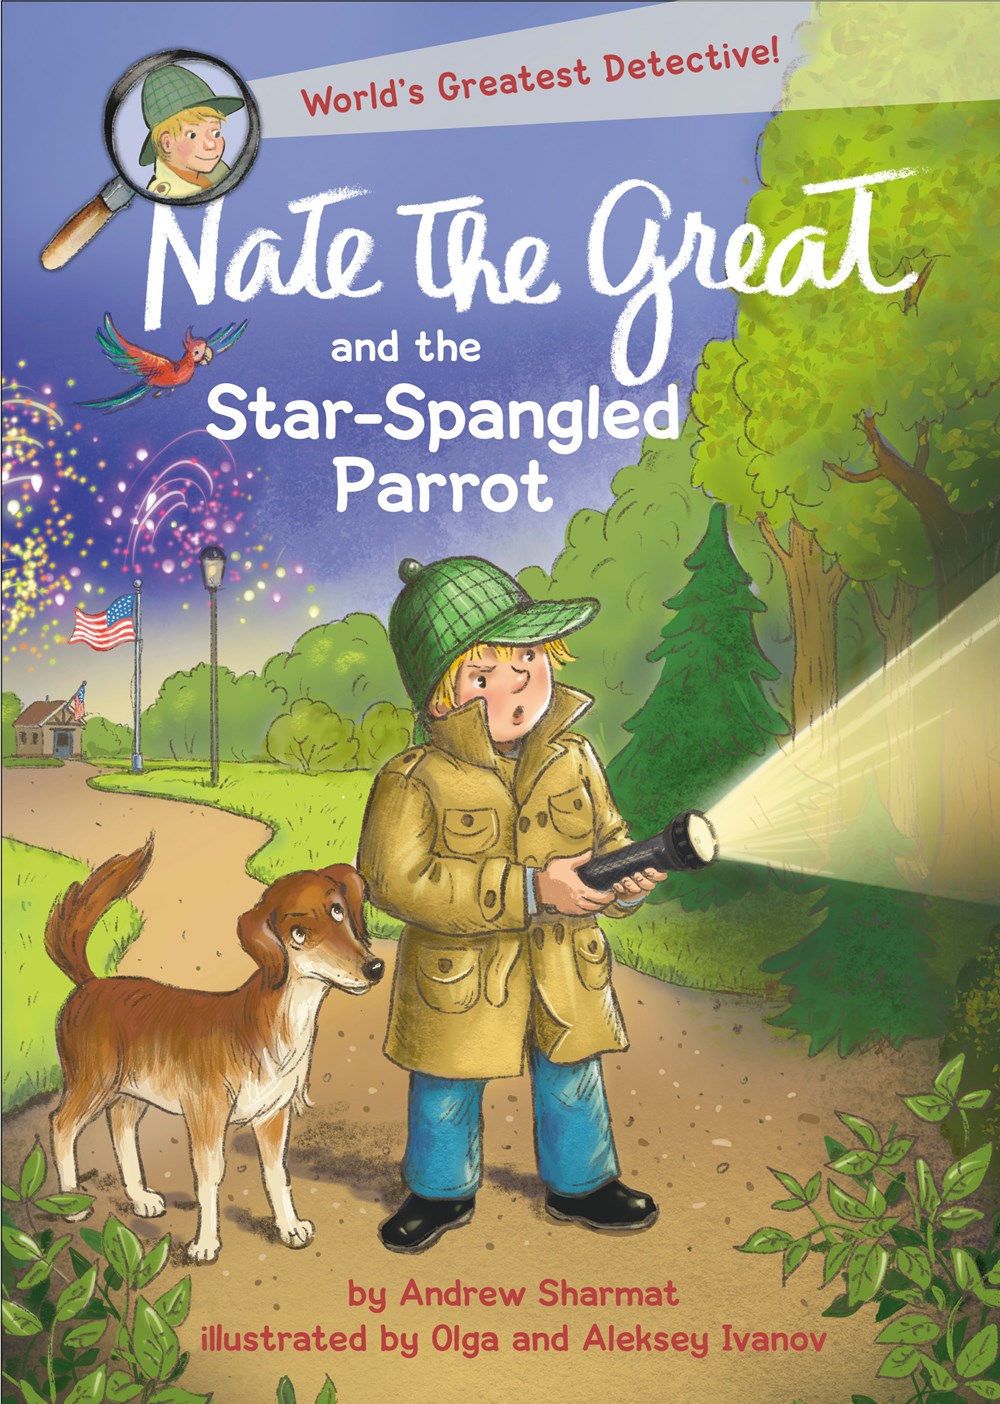 Giveaway: NATE THE GREAT AND THE STAR-SPANGLED PARROT (Andrew Sharmat)~ US ONLY!